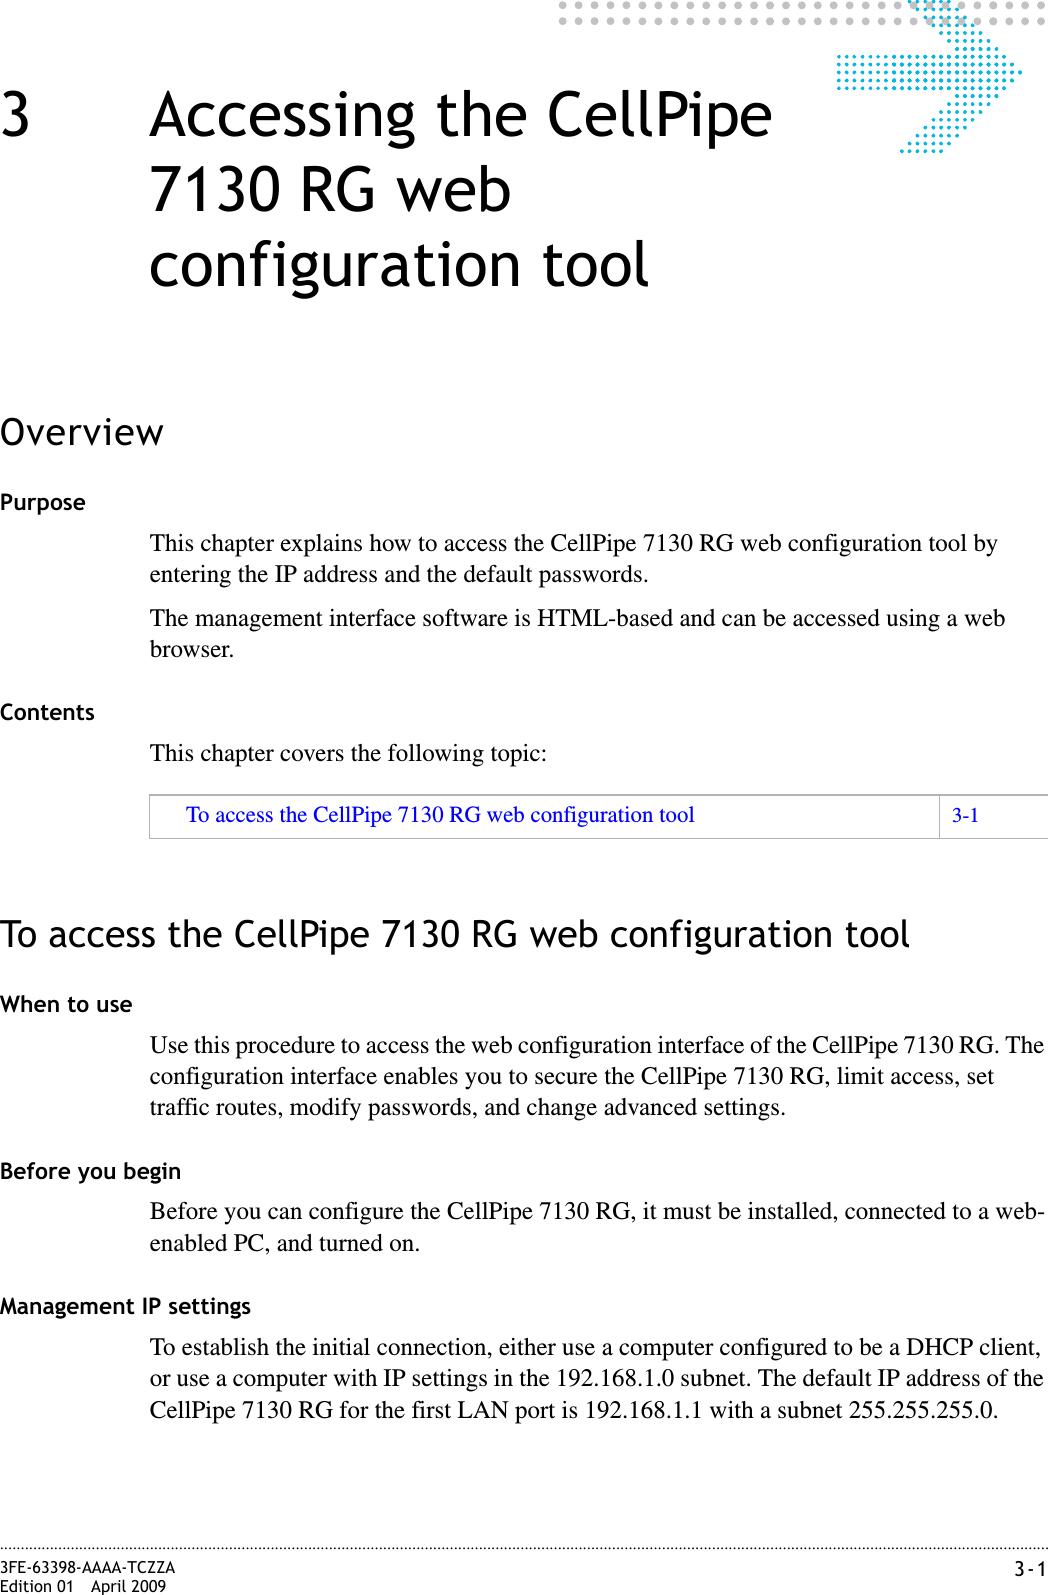 3-13FE-63398-AAAA-TCZZAEdition 01 April 2009............................................................................................................................................................................................................................................................3 Accessing the CellPipe 7130 RG web configuration toolOverviewPurposeThis chapter explains how to access the CellPipe 7130 RG web configuration tool by entering the IP address and the default passwords.The management interface software is HTML-based and can be accessed using a web browser.ContentsThis chapter covers the following topic:To access the CellPipe 7130 RG web configuration toolWhen to useUse this procedure to access the web configuration interface of the CellPipe 7130 RG. The configuration interface enables you to secure the CellPipe 7130 RG, limit access, set traffic routes, modify passwords, and change advanced settings.Before you beginBefore you can configure the CellPipe 7130 RG, it must be installed, connected to a web-enabled PC, and turned on.Management IP settingsTo establish the initial connection, either use a computer configured to be a DHCP client, or use a computer with IP settings in the 192.168.1.0 subnet. The default IP address of the CellPipe 7130 RG for the first LAN port is 192.168.1.1 with a subnet 255.255.255.0.To access the CellPipe 7130 RG web configuration tool 3-1